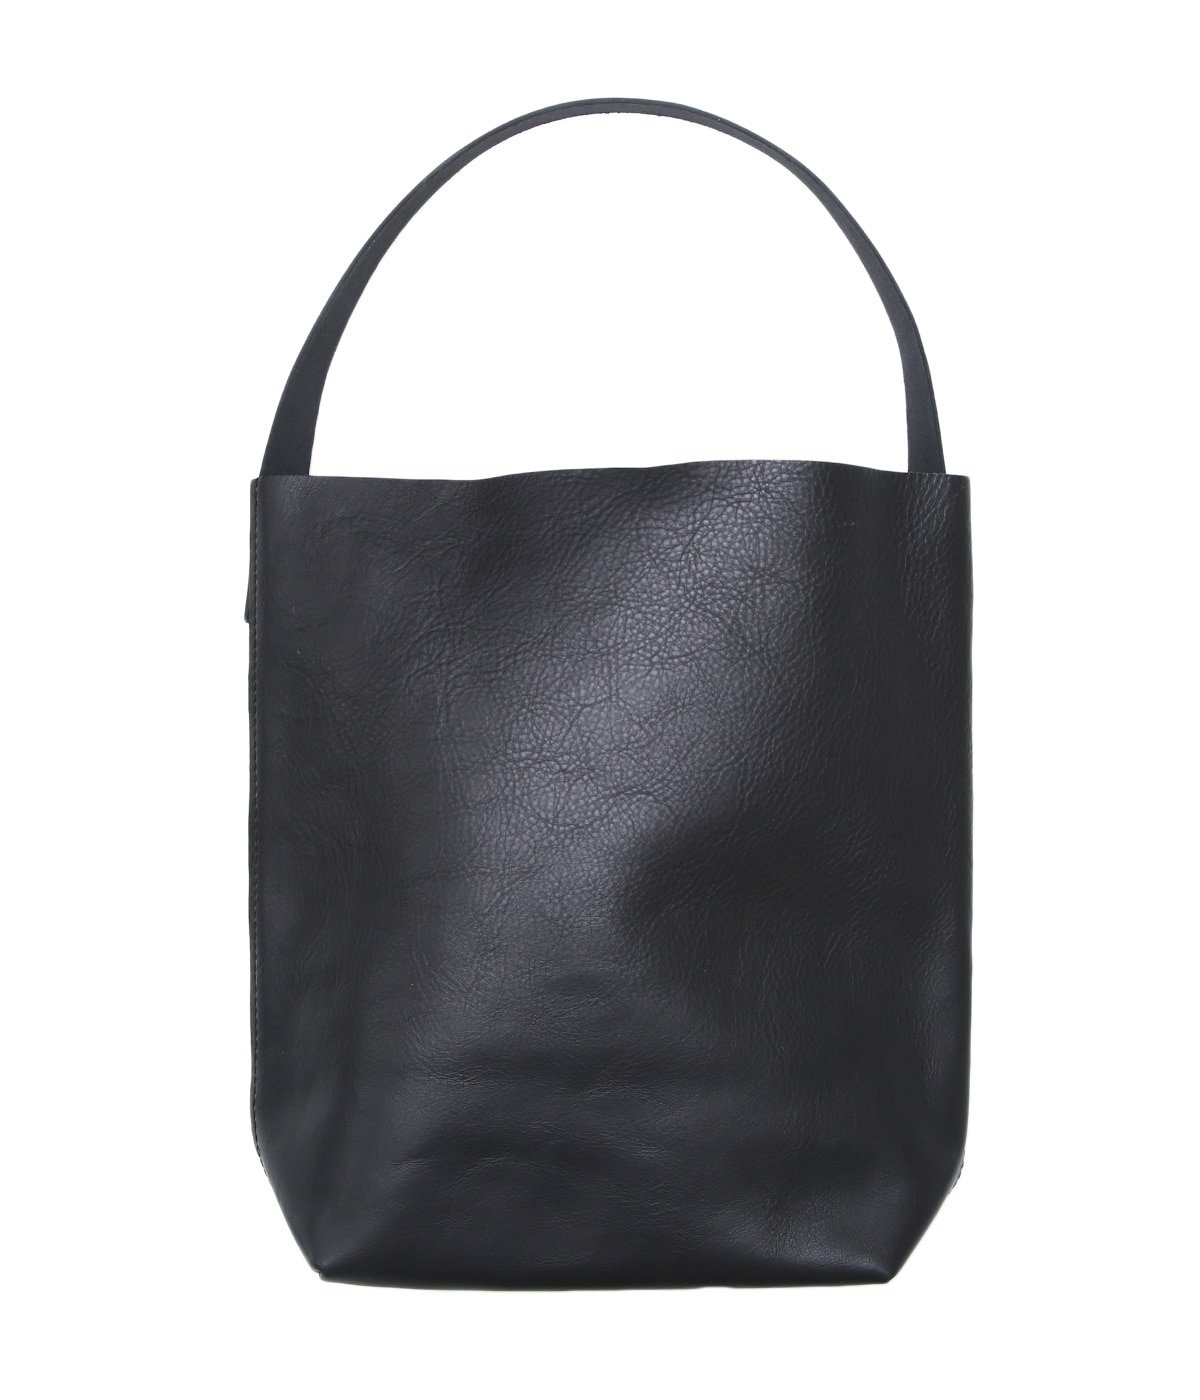 BAGUETTE TOTE LEATHER | TEMBEA(テンベア) / バッグ トートバッグ 